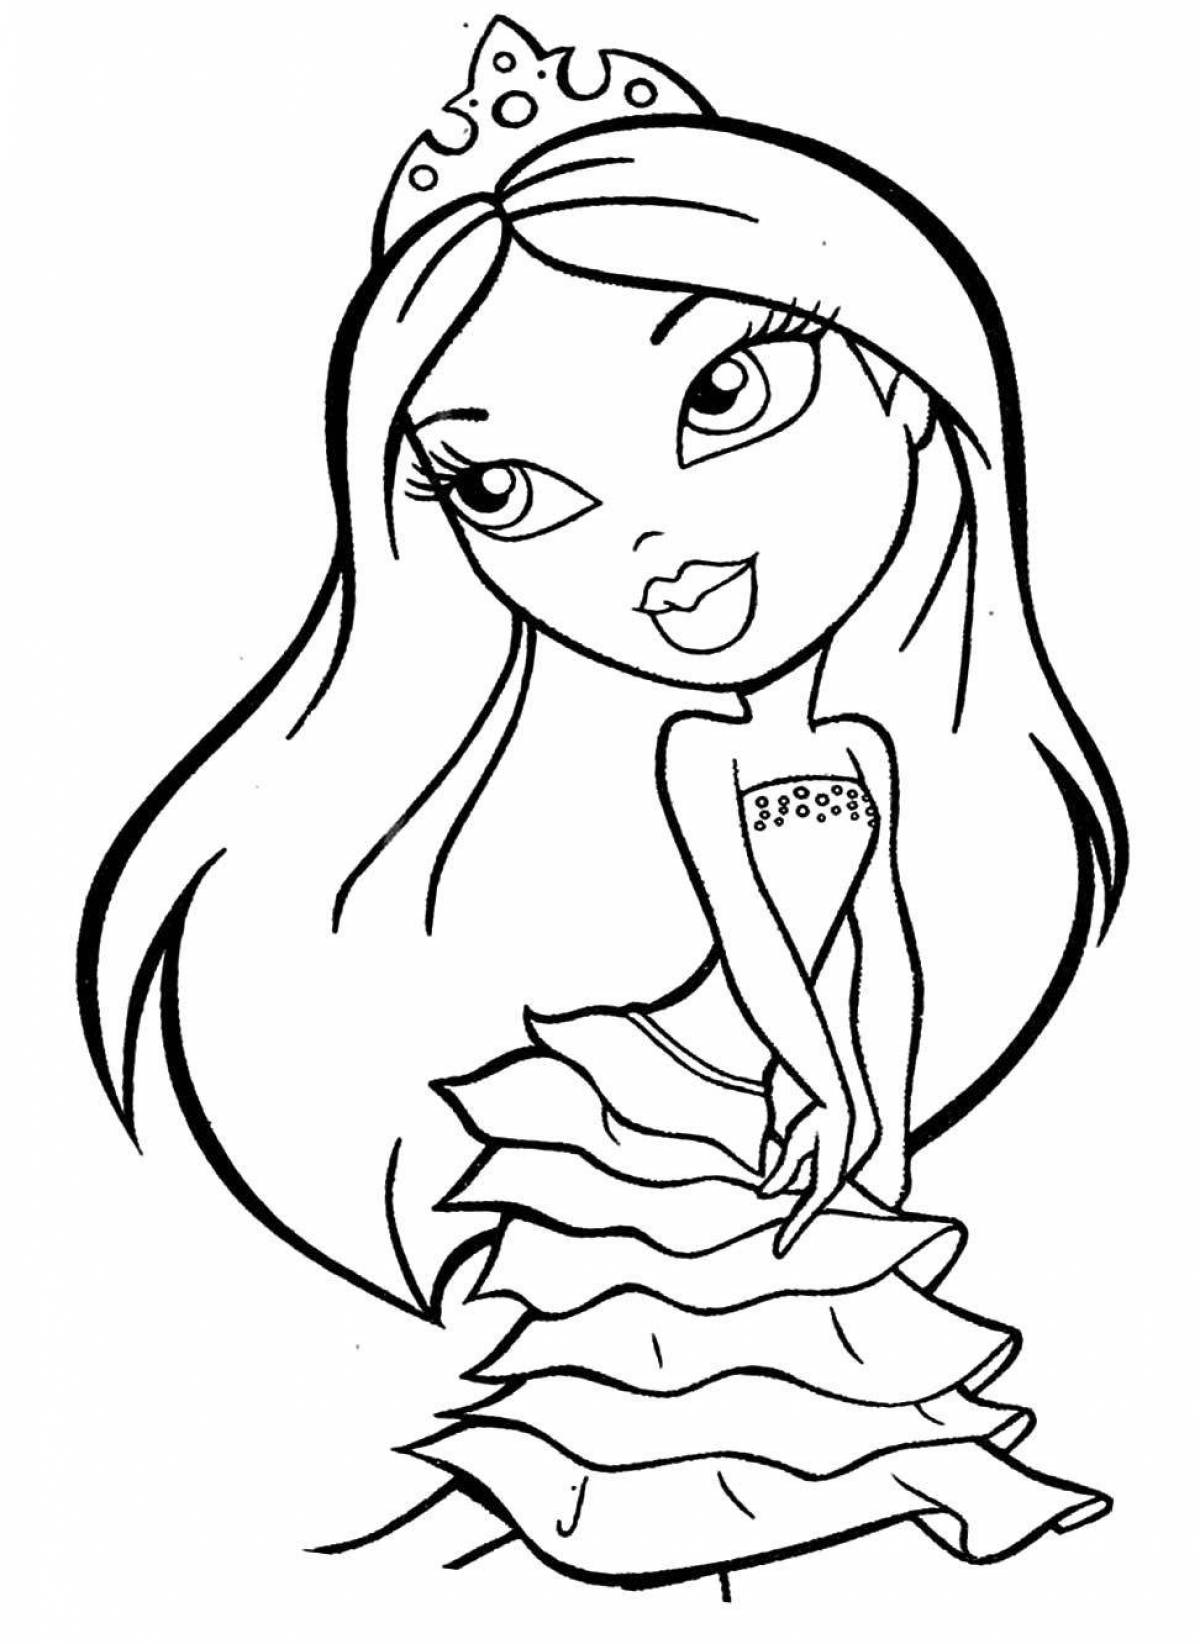 Charming poppy coloring page